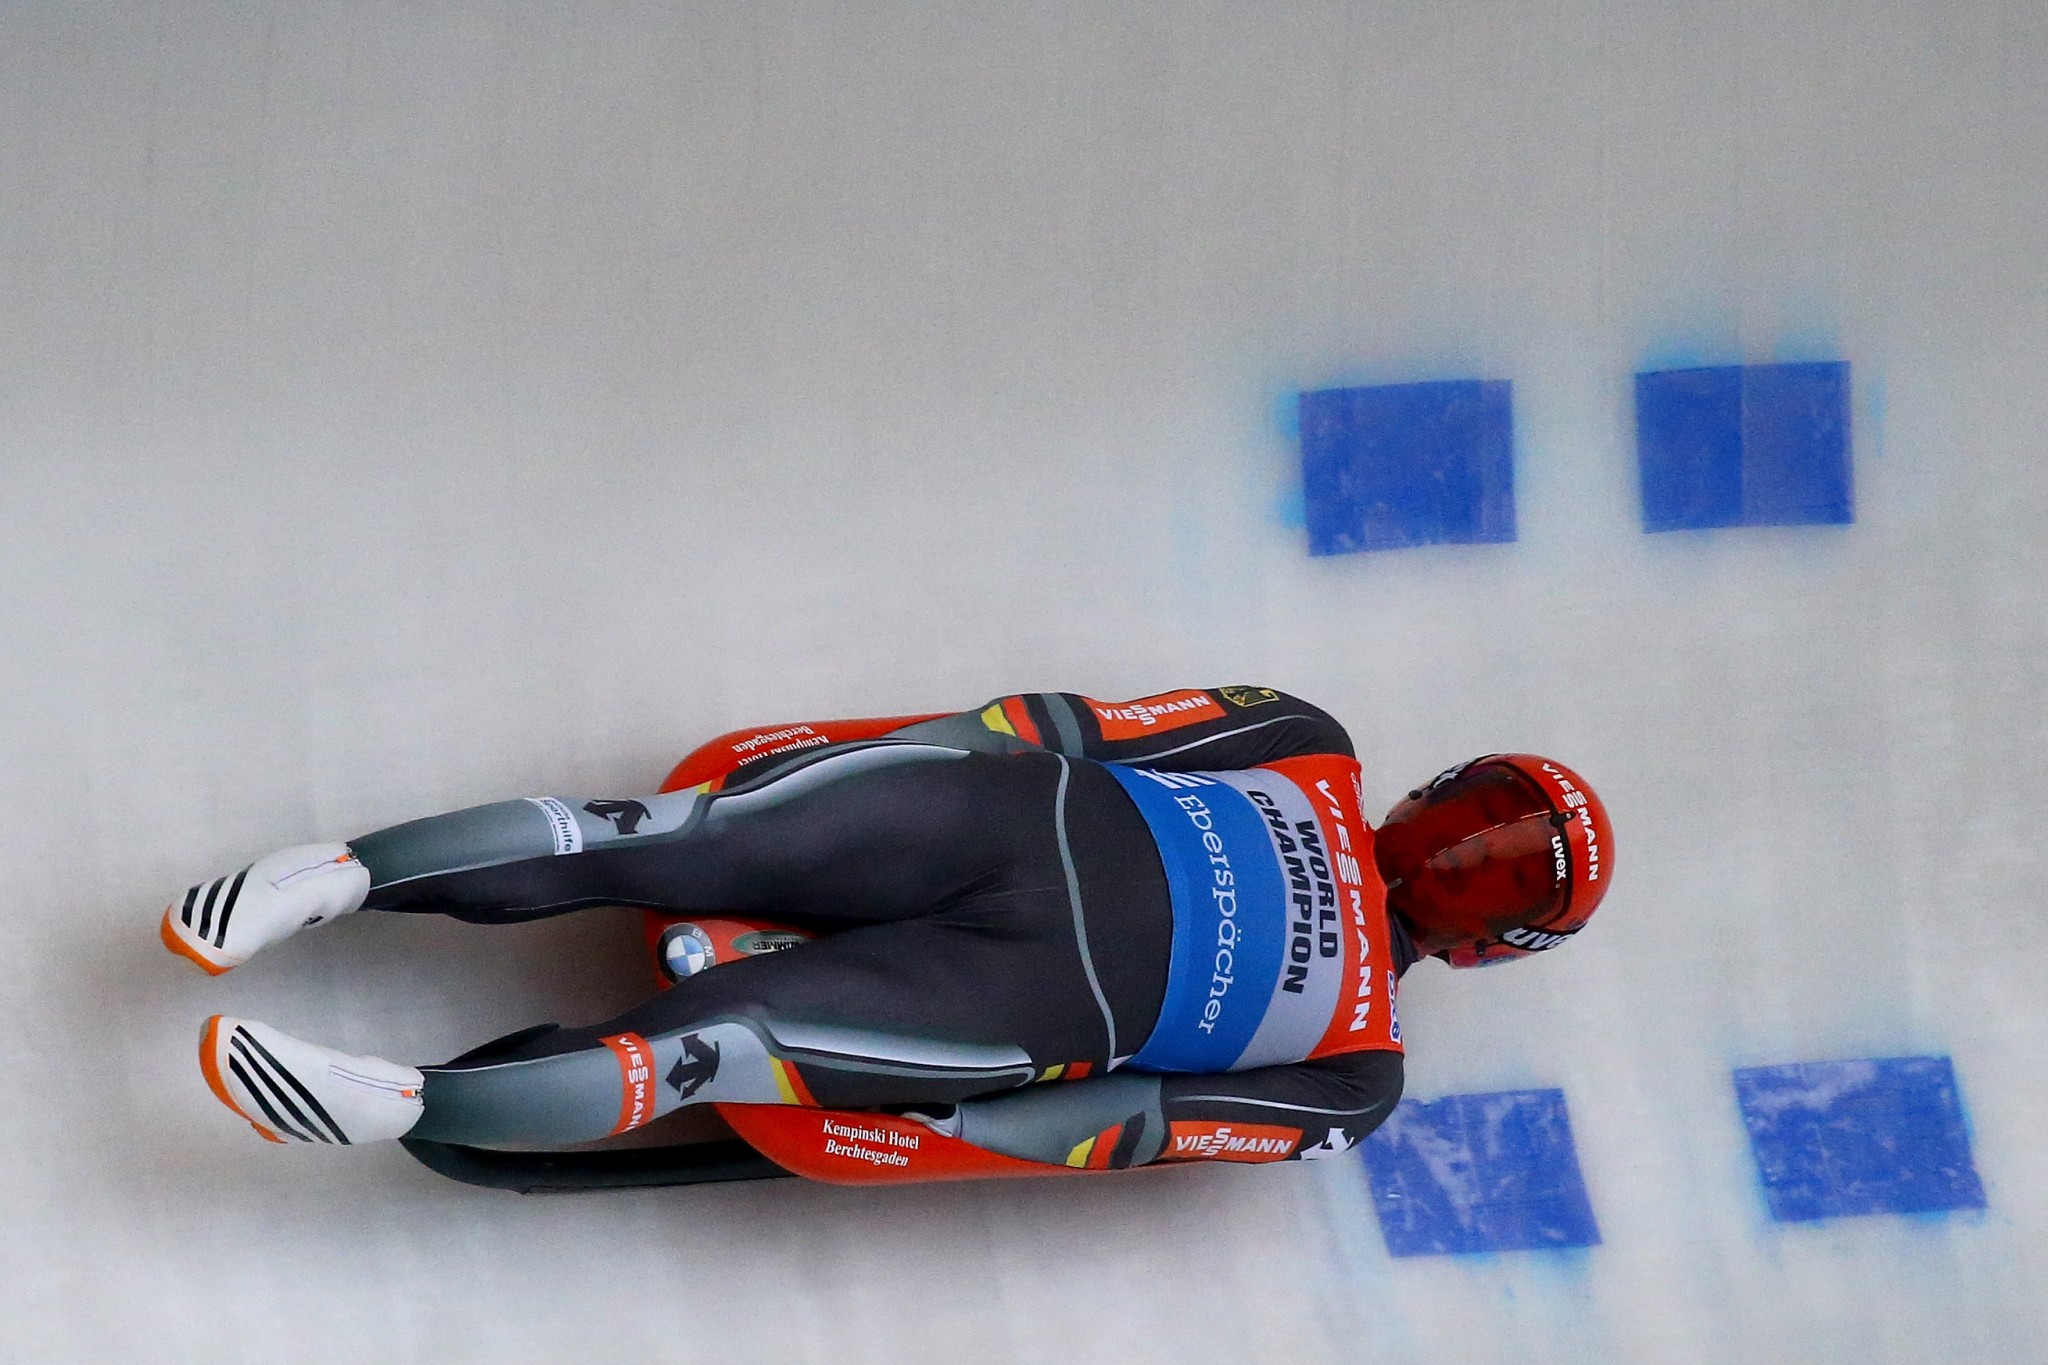 Infront markets sponsorship packages for luge events around the world ©Getty Images